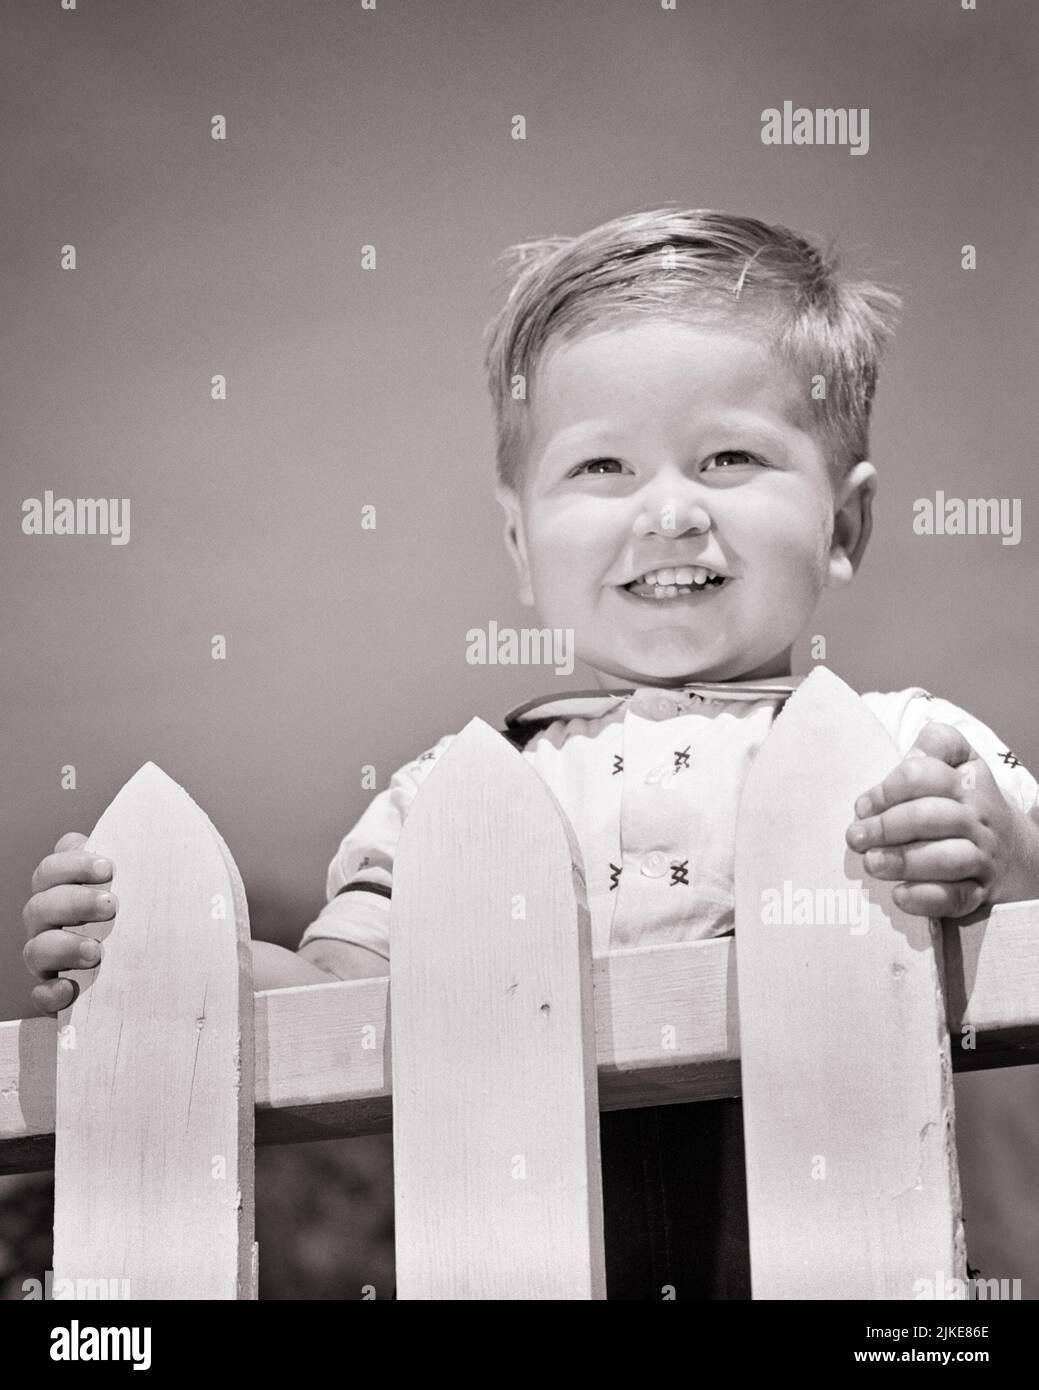 1950s PORTRAIT TODDLER BOY SMILING STANDING AT WHITE PICKET FENCE LOOKING AT CAMERA - j5411 HAR001 HARS HEALTHINESS HOME LIFE COPY SPACE MALES CONFIDENCE B&W EYE CONTACT HAPPINESS HEAD AND SHOULDERS CHEERFUL LEADERSHIP LOW ANGLE HANDSOME PRIDE SMILES JOYFUL BABY BOY PLEASANT AGREEABLE CHARMING EAGER GROWTH JUVENILES LOVABLE PLEASING ADORABLE APPEALING BLACK AND WHITE CAUCASIAN ETHNICITY HAR001 OLD FASHIONED Stock Photo